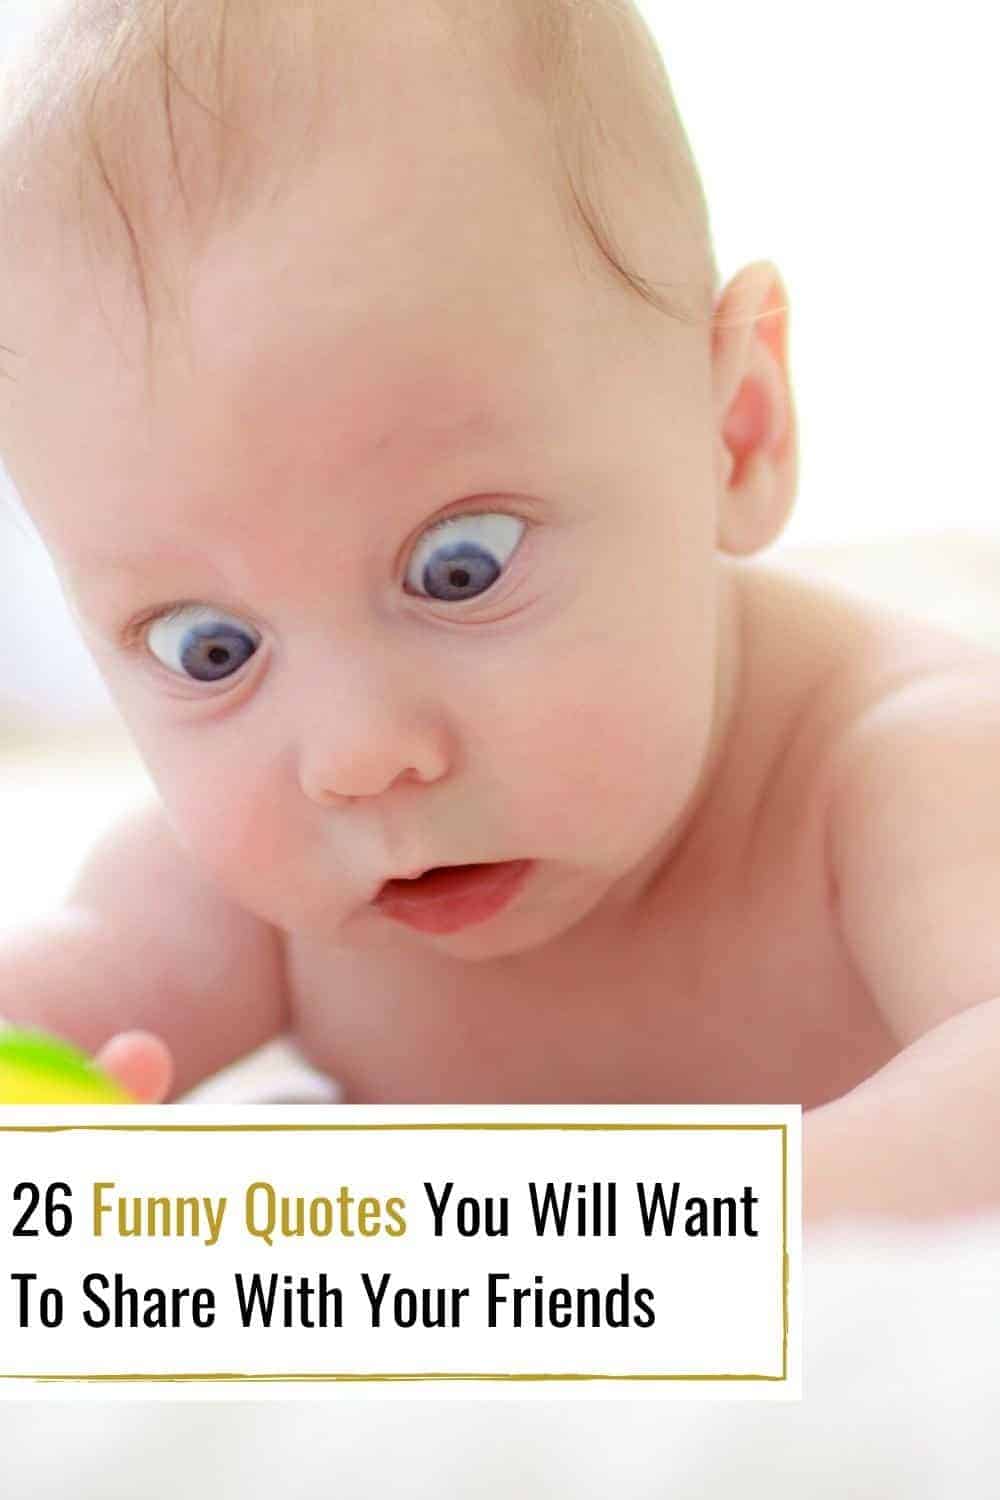 26 Funny Quotes You Will Want To Share With Your Friends